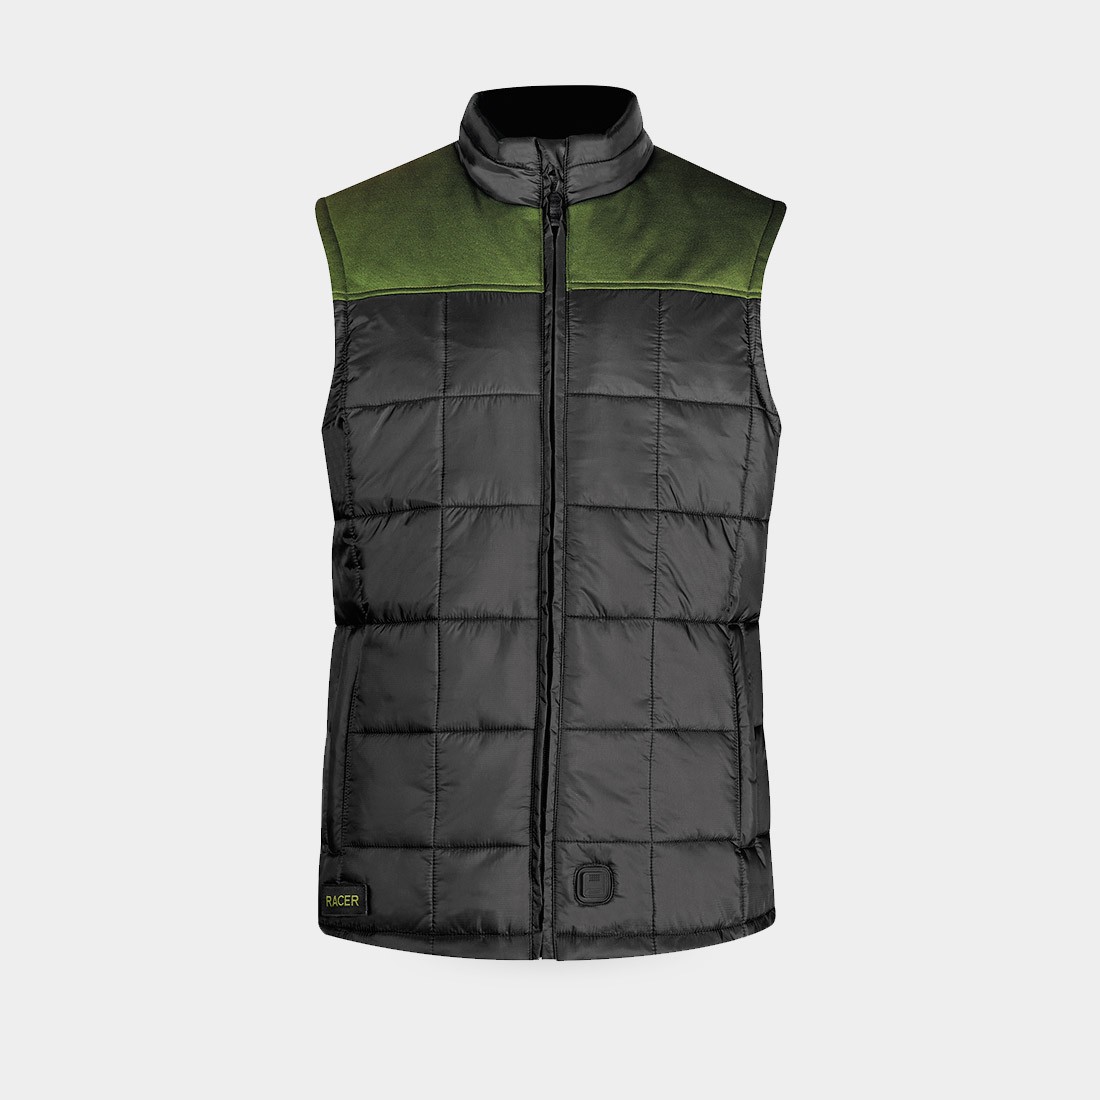 THE DISTRICT MEN 2 - Heated down jacket